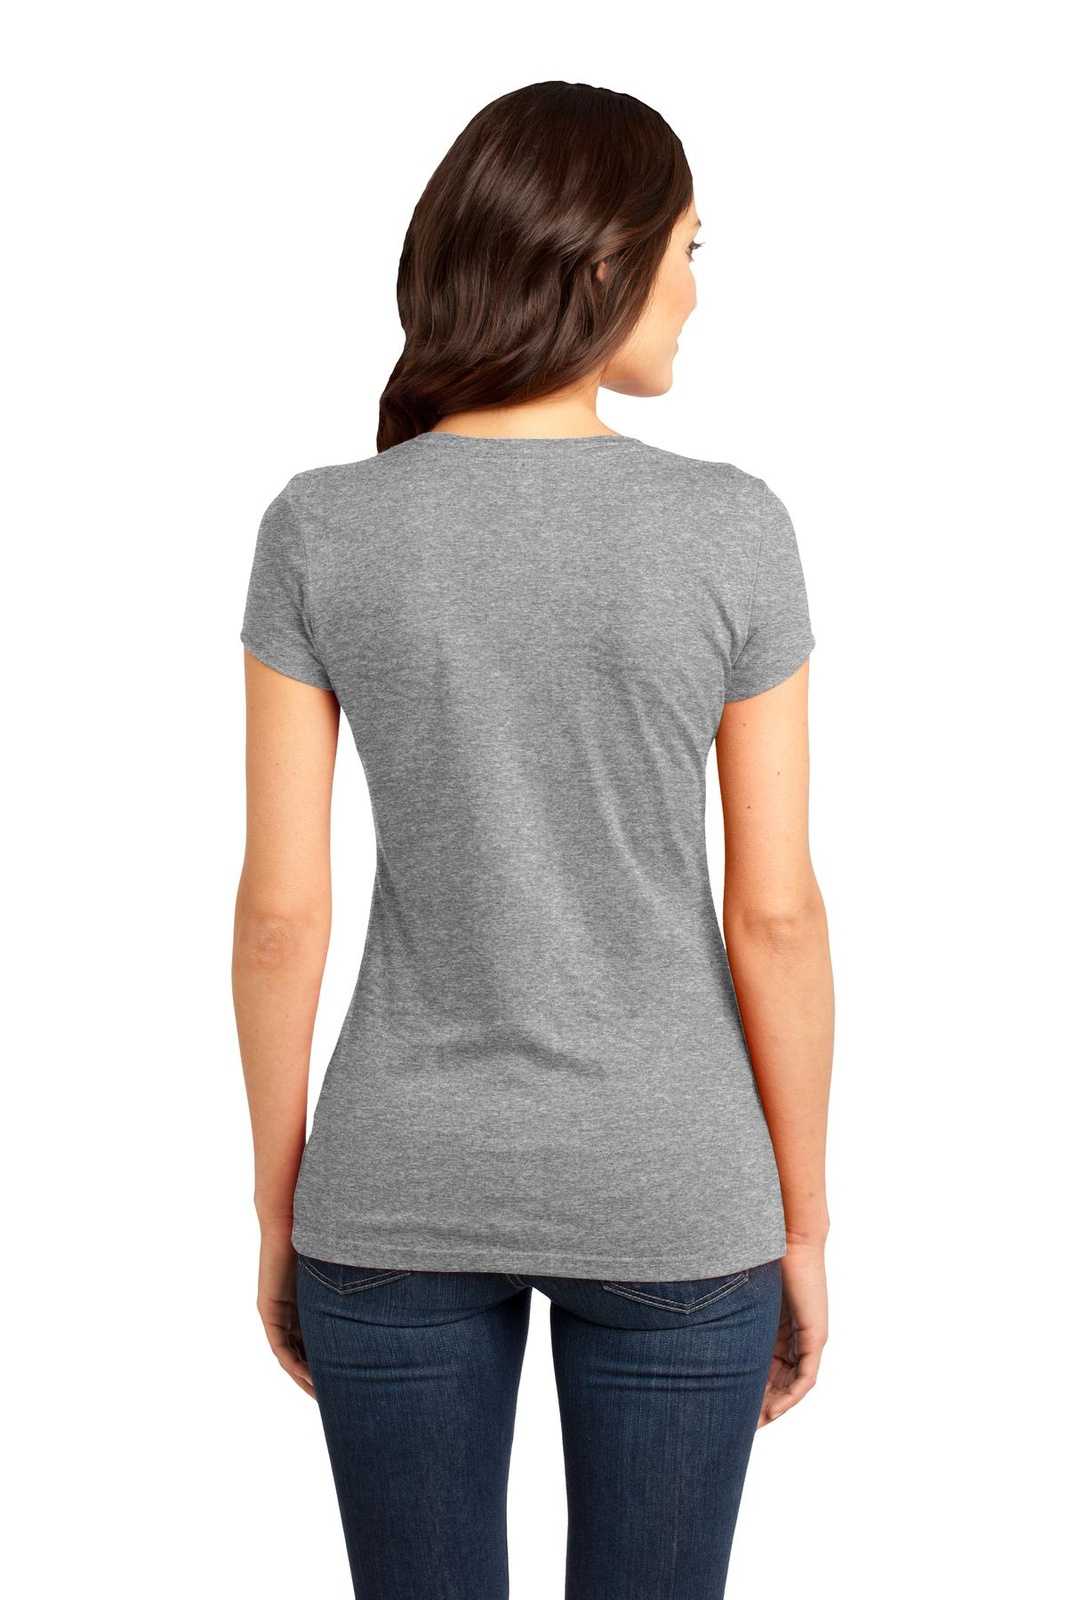 District DT6001 Women's Fitted Very Important Tee - Light Heather Gray - HIT a Double - 1